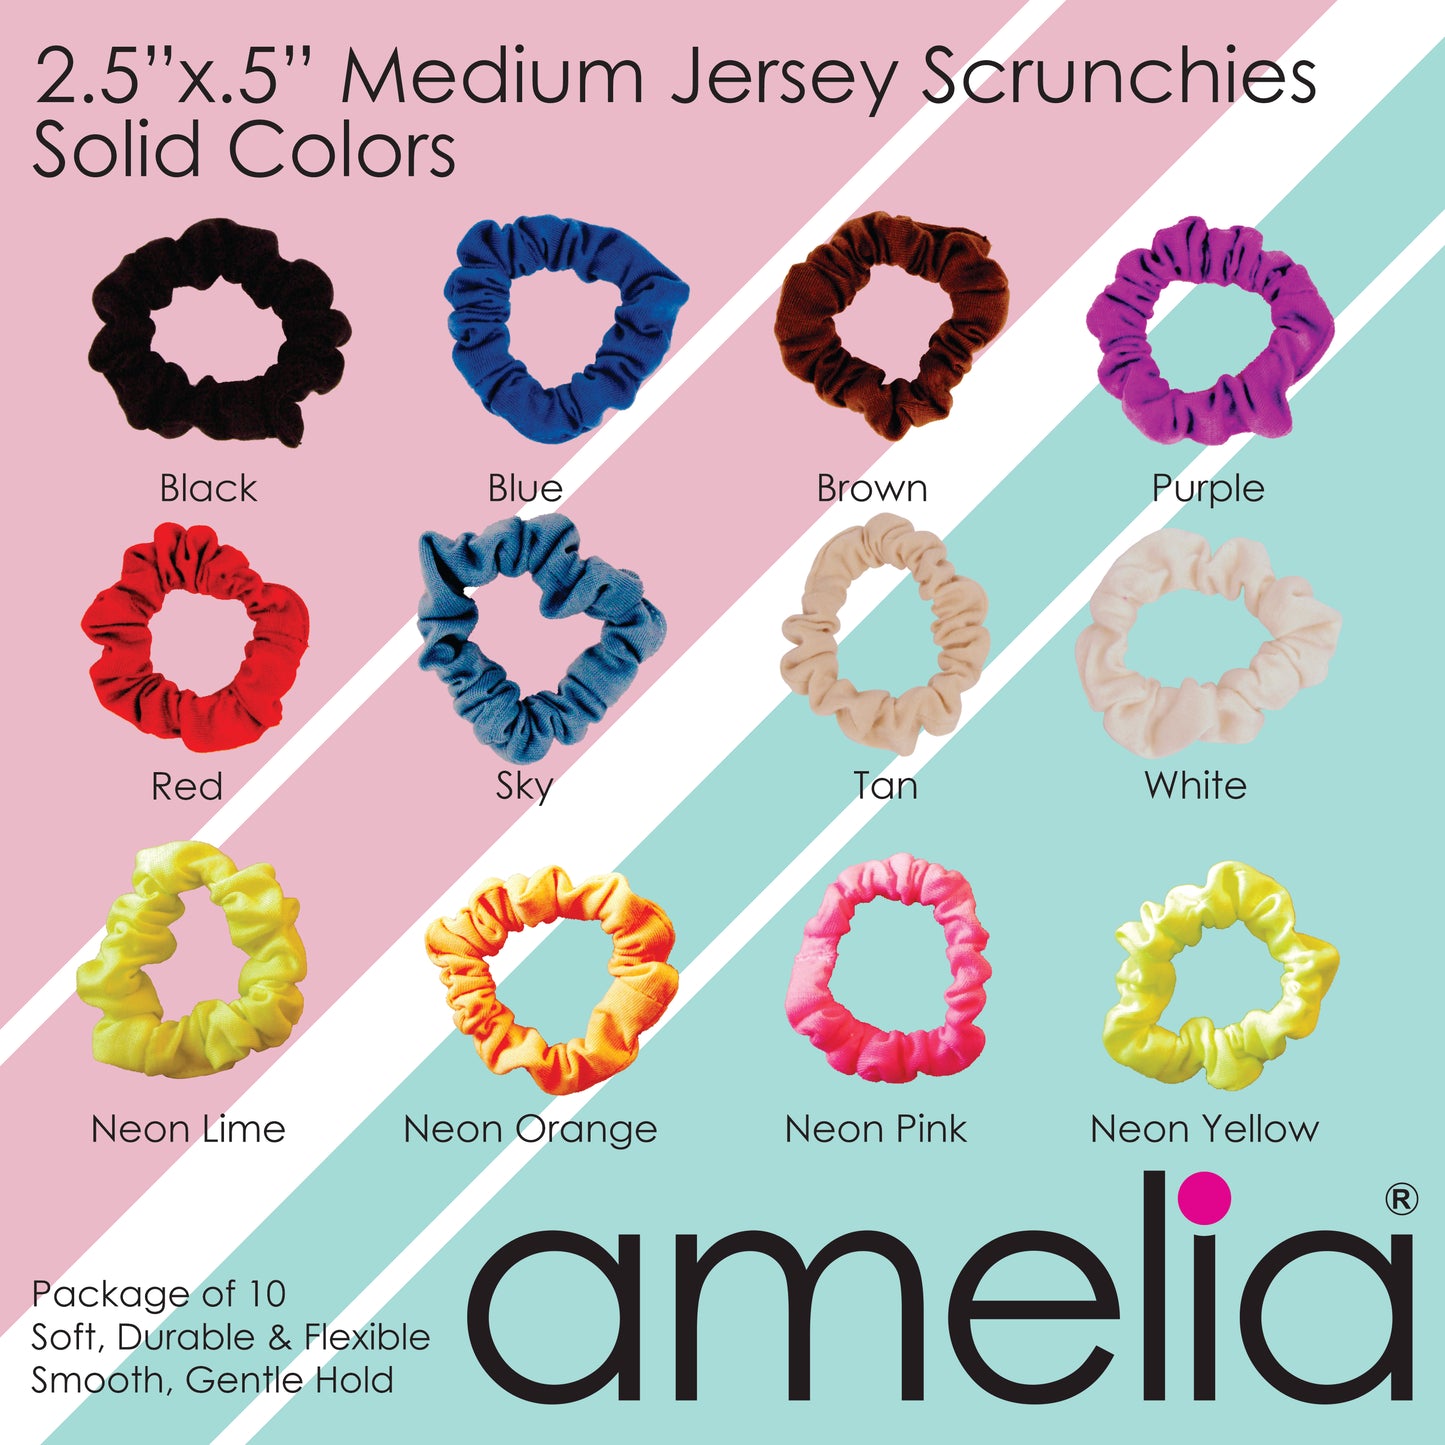 Amelia Beauty, Medium Pastel Stripe Jersey Scrunchies, 2.5in Diameter, Gentle on Hair, Strong Hold, No Snag, No Dents or Creases. 10 Pack